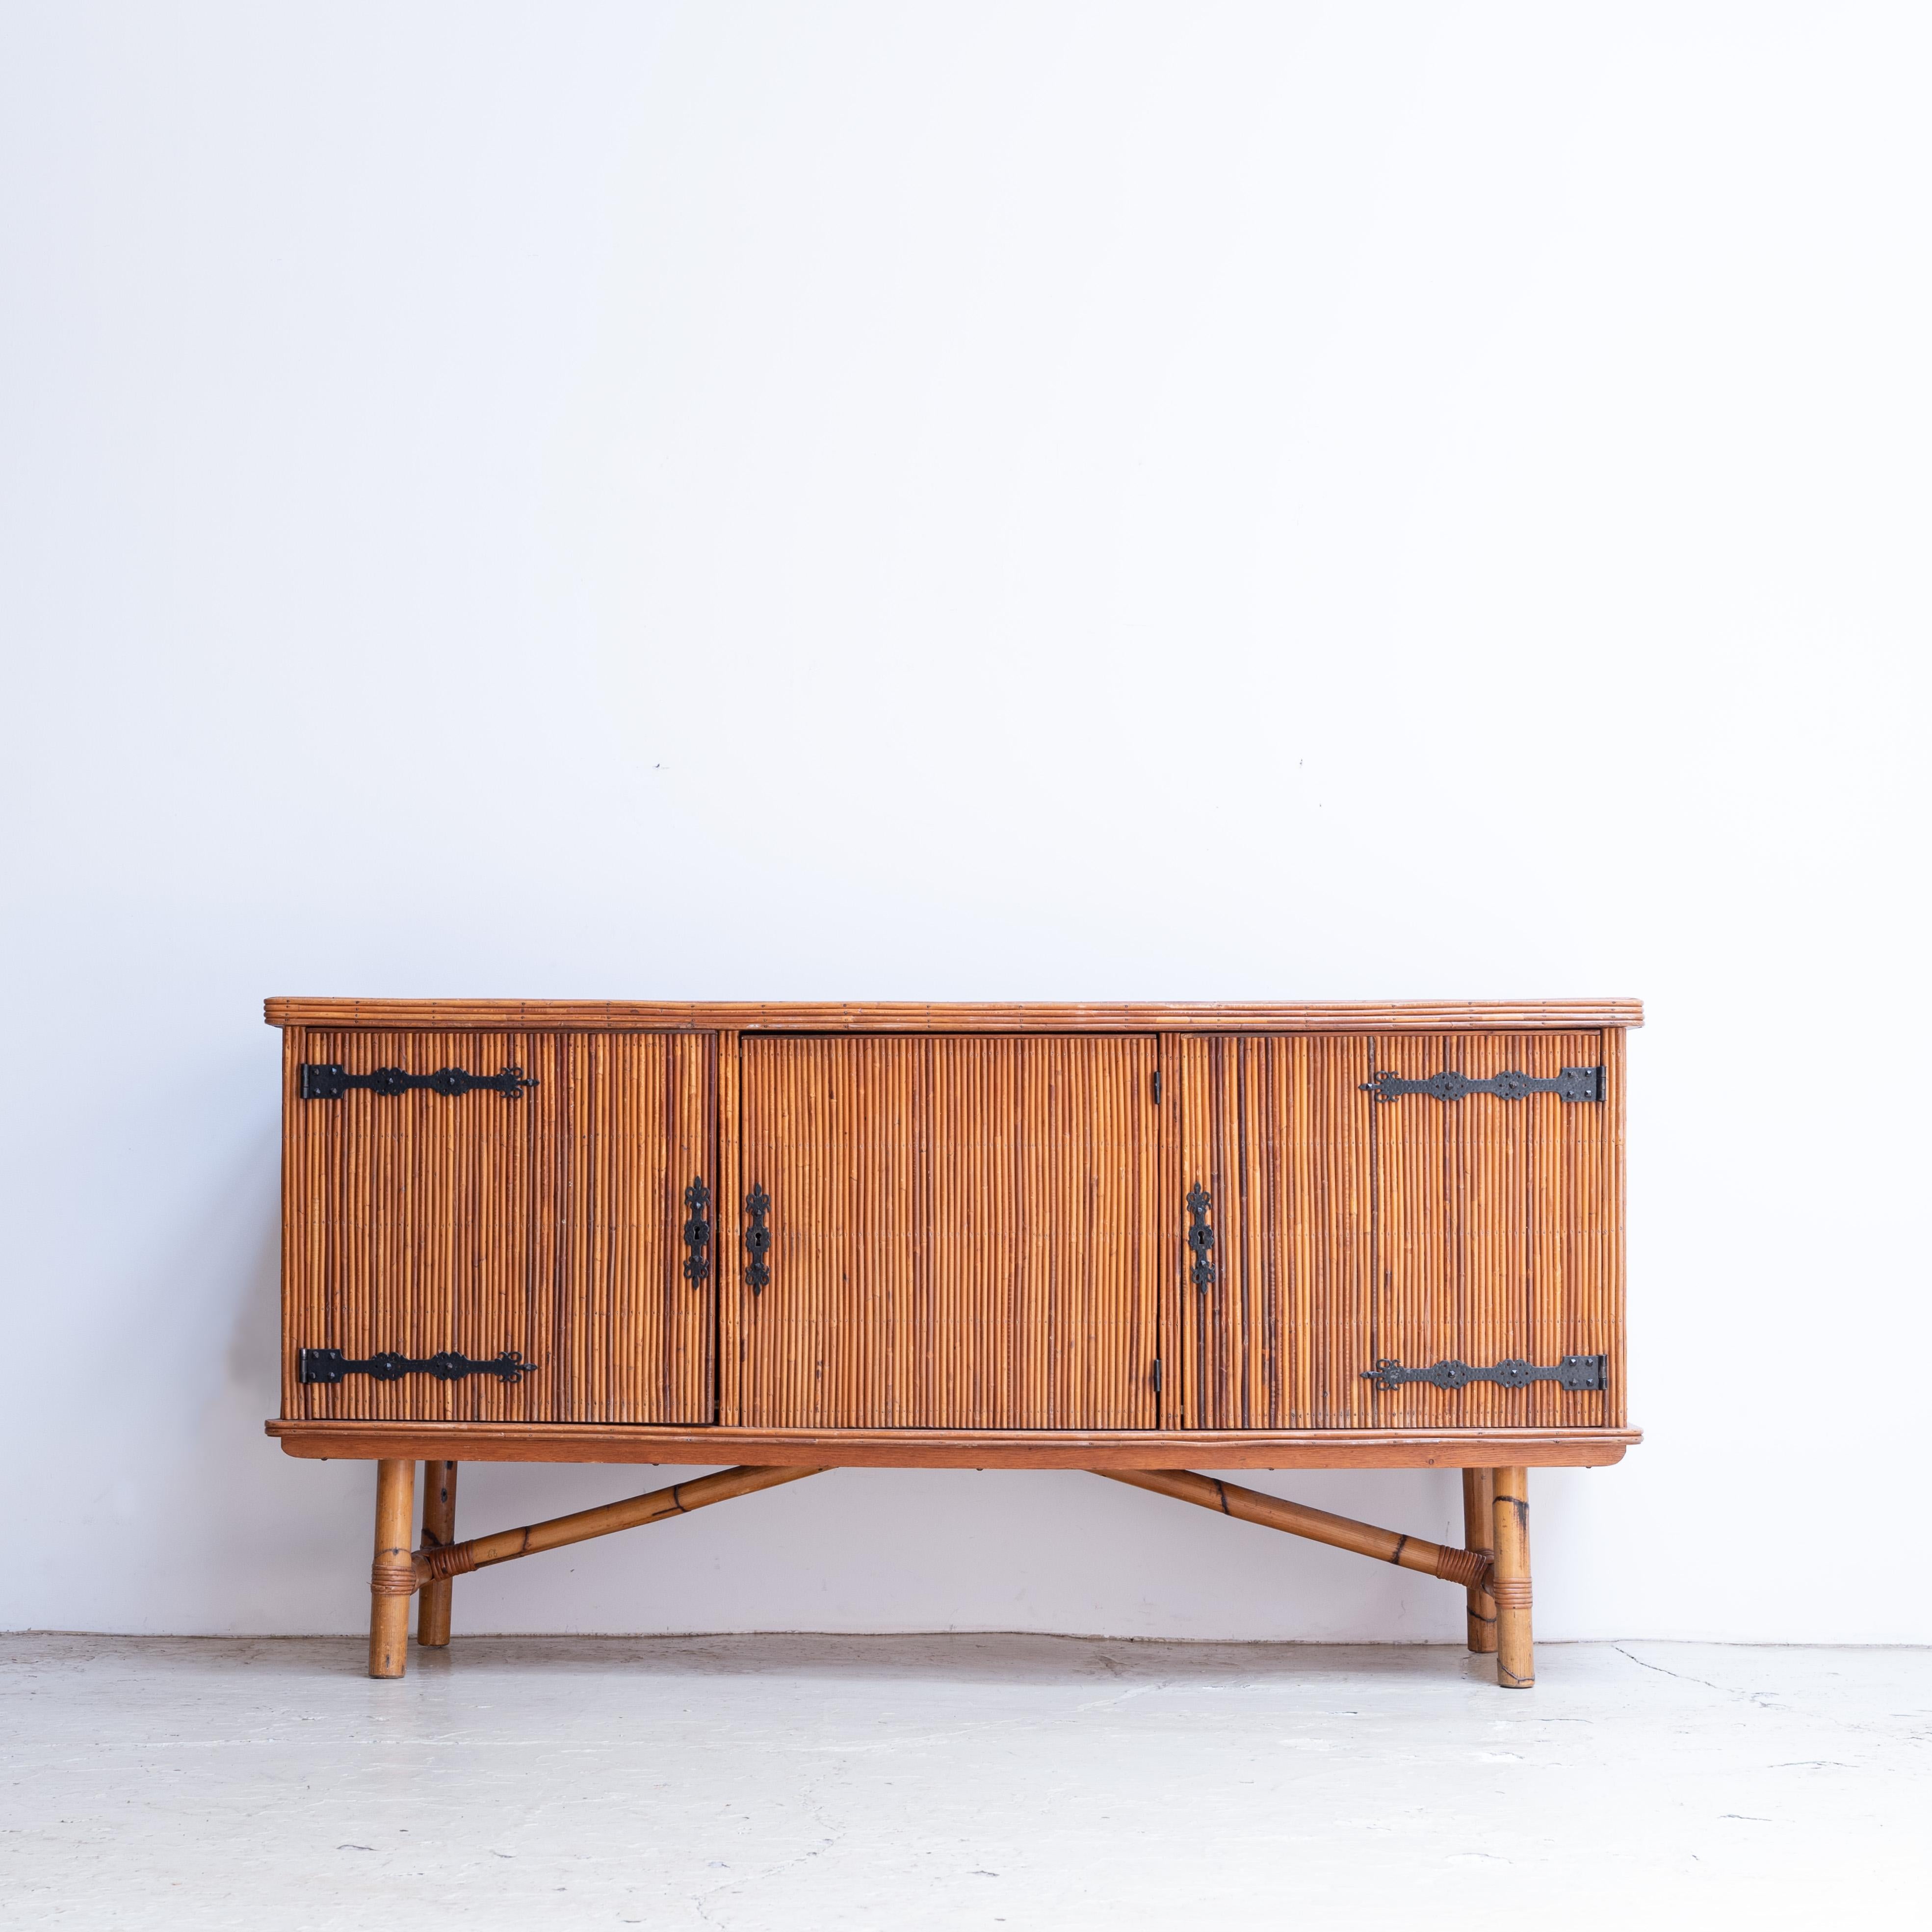 Bamboo sideboard designed by French designer duo Adrien Audoux & Frida Minet. Circa 1960s.
Three doors that have decorative wrought iron hinges. An original key to open and close the cabinet doors.

Dimensions: 181 x 51 x 90.5 cm
The size of the